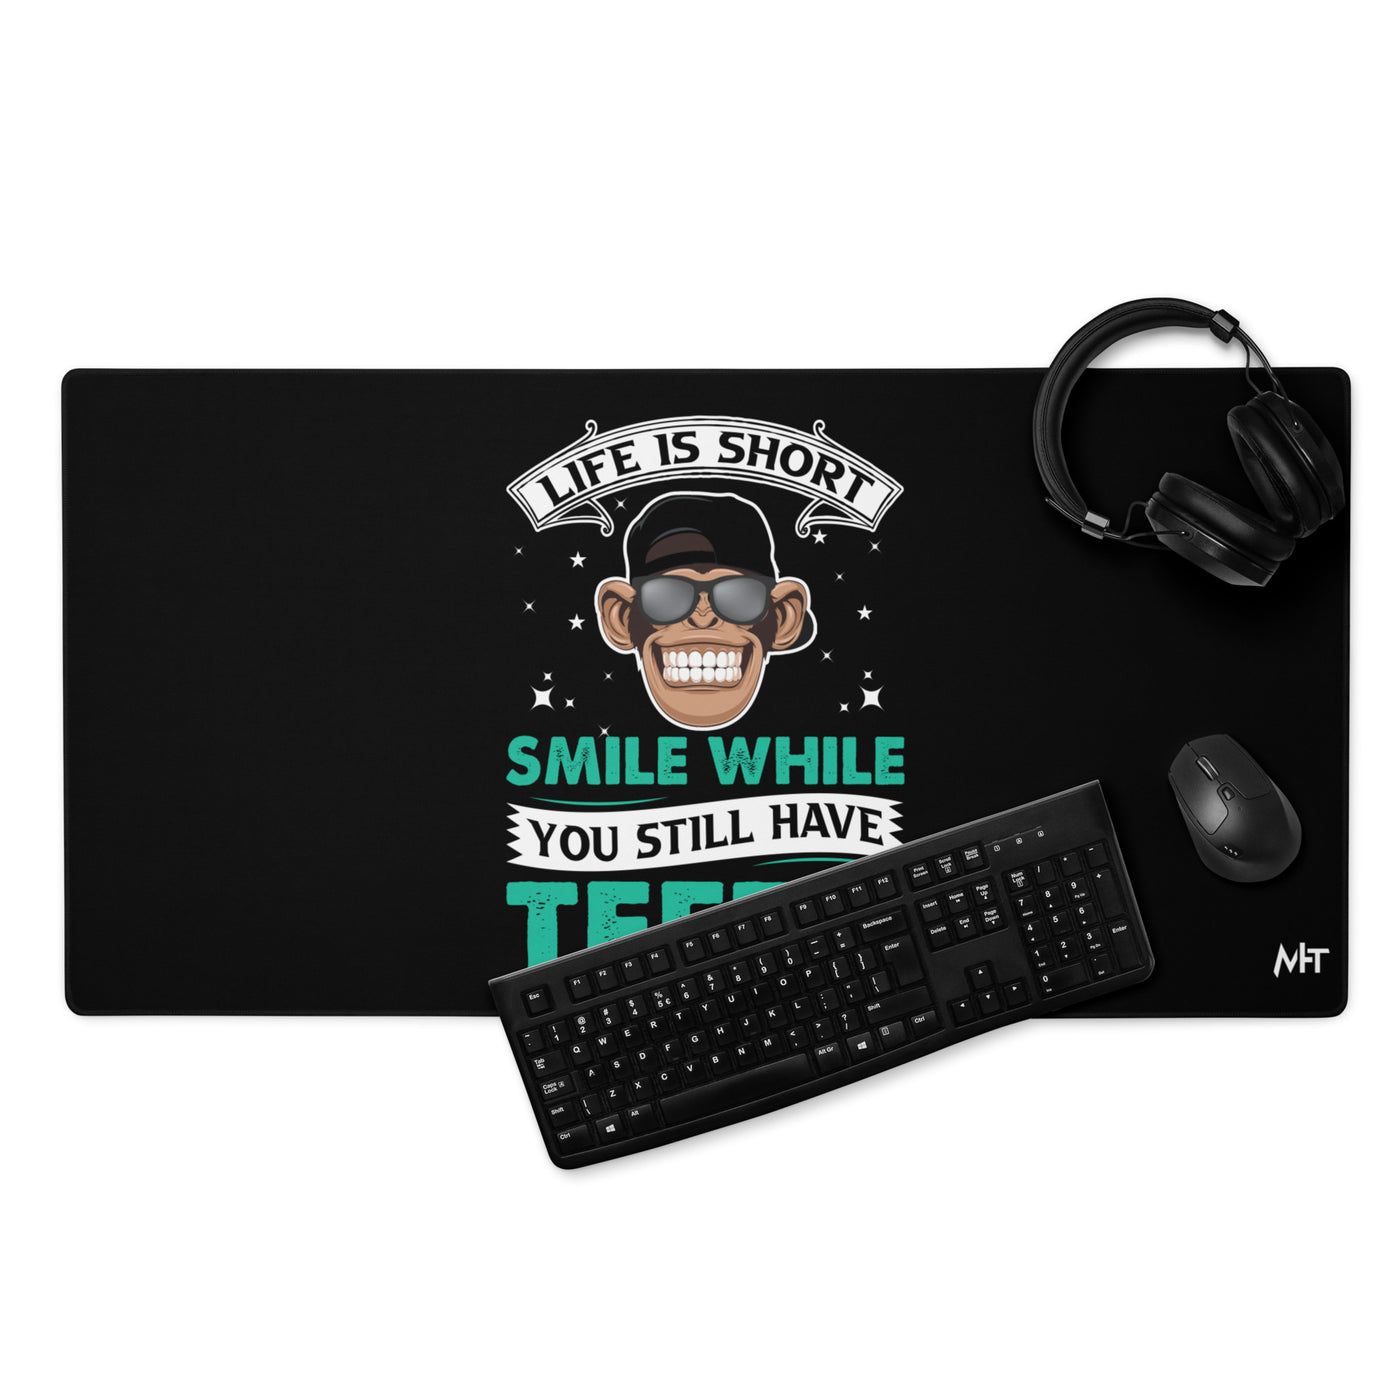 Life is Short, Smile while you still have teeth - Desk Mat